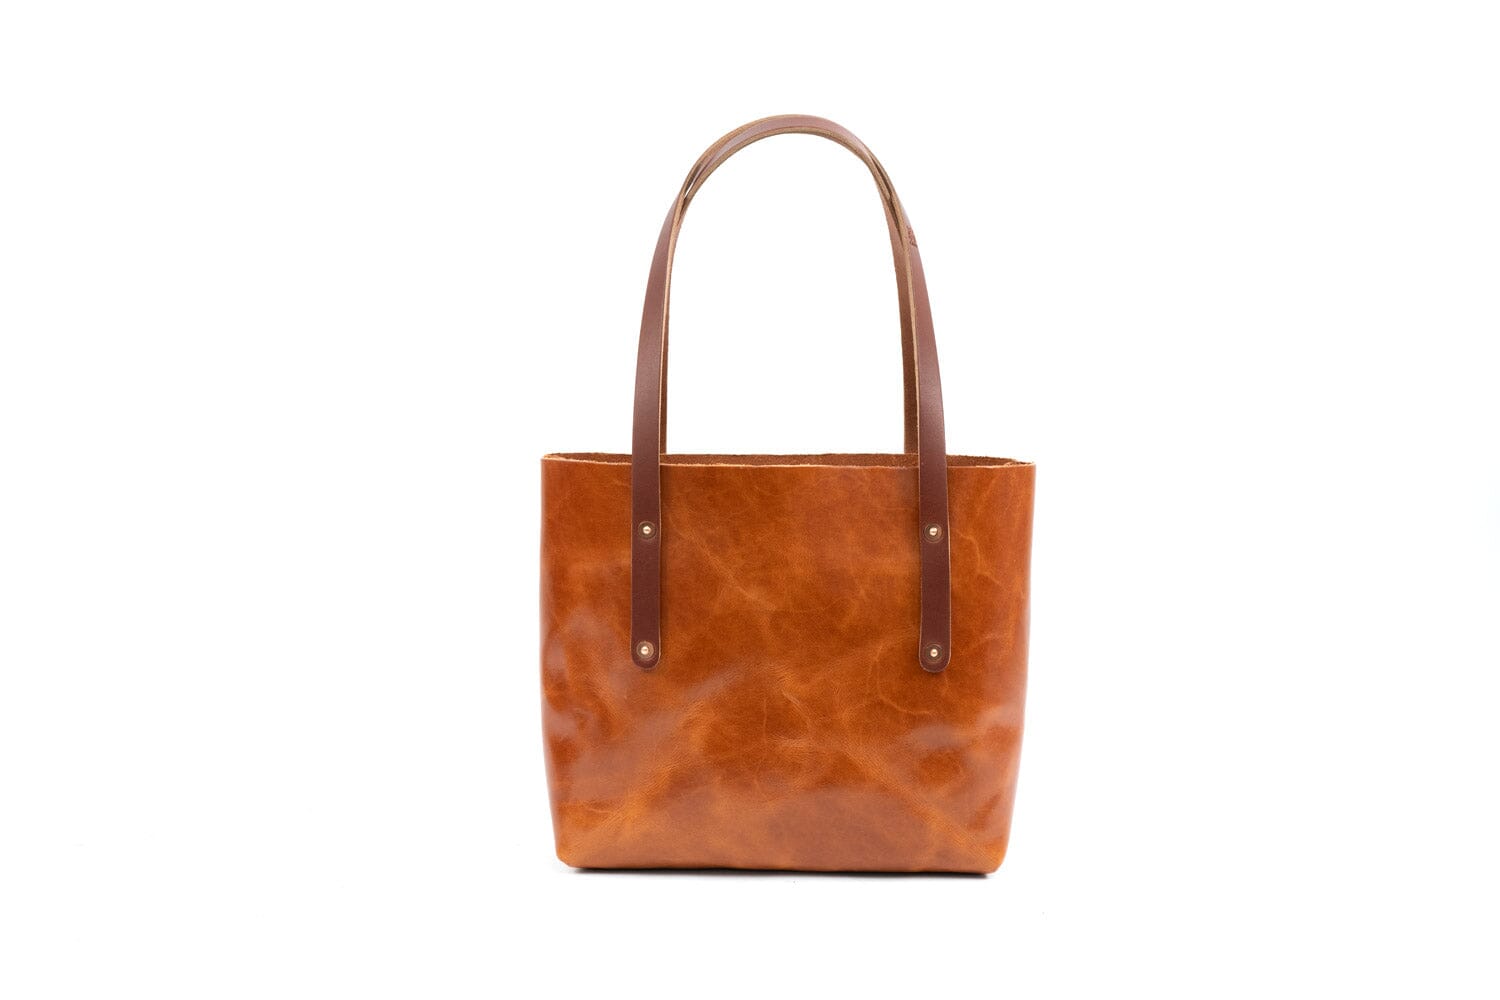 AVERY LEATHER TOTE BAG - SMALL - CARAMEL